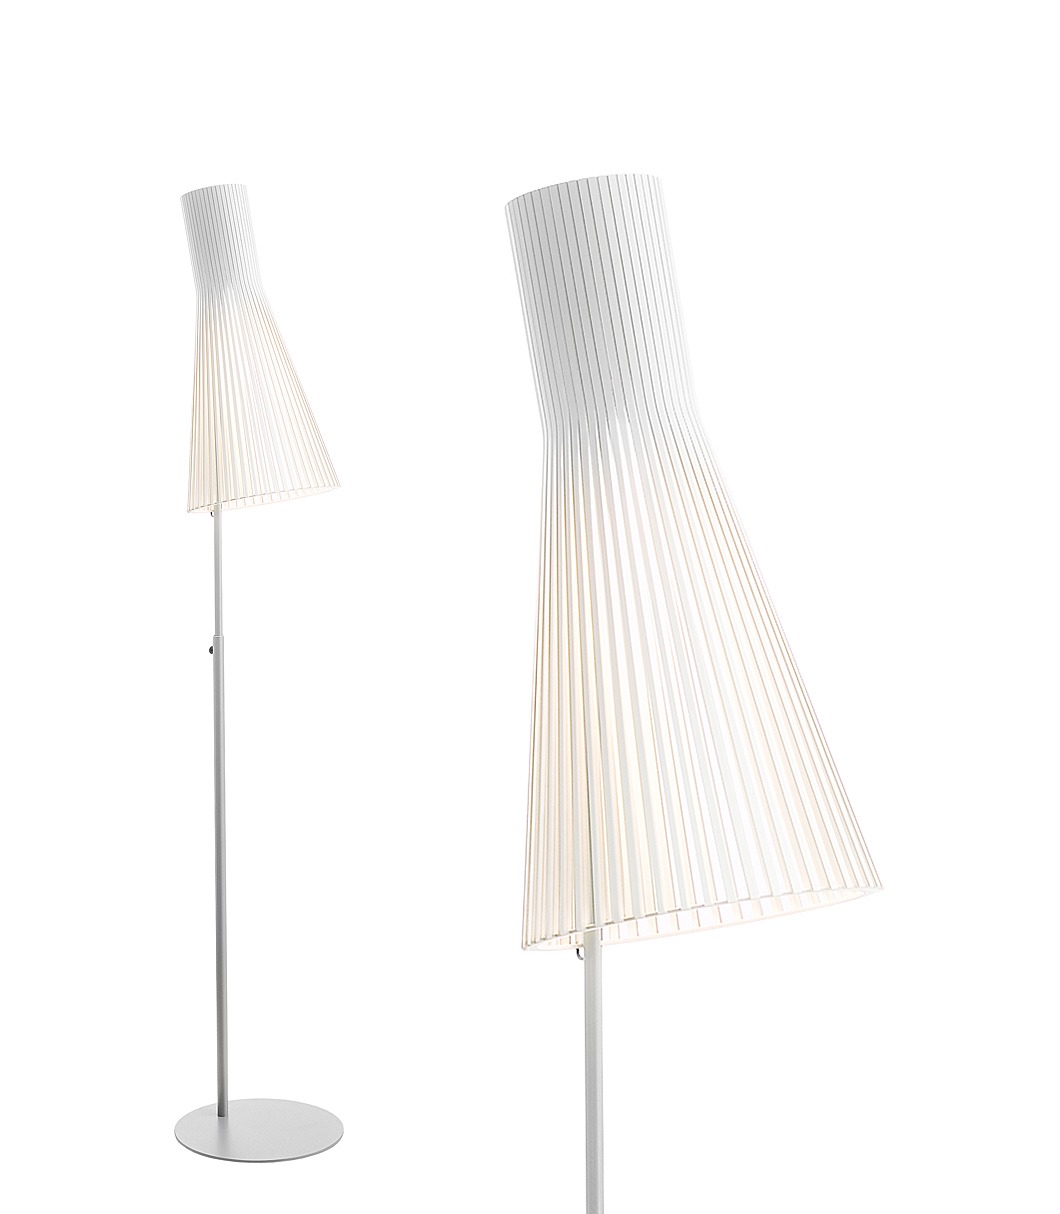 Secto 4210 floor lamp is available in white laminated